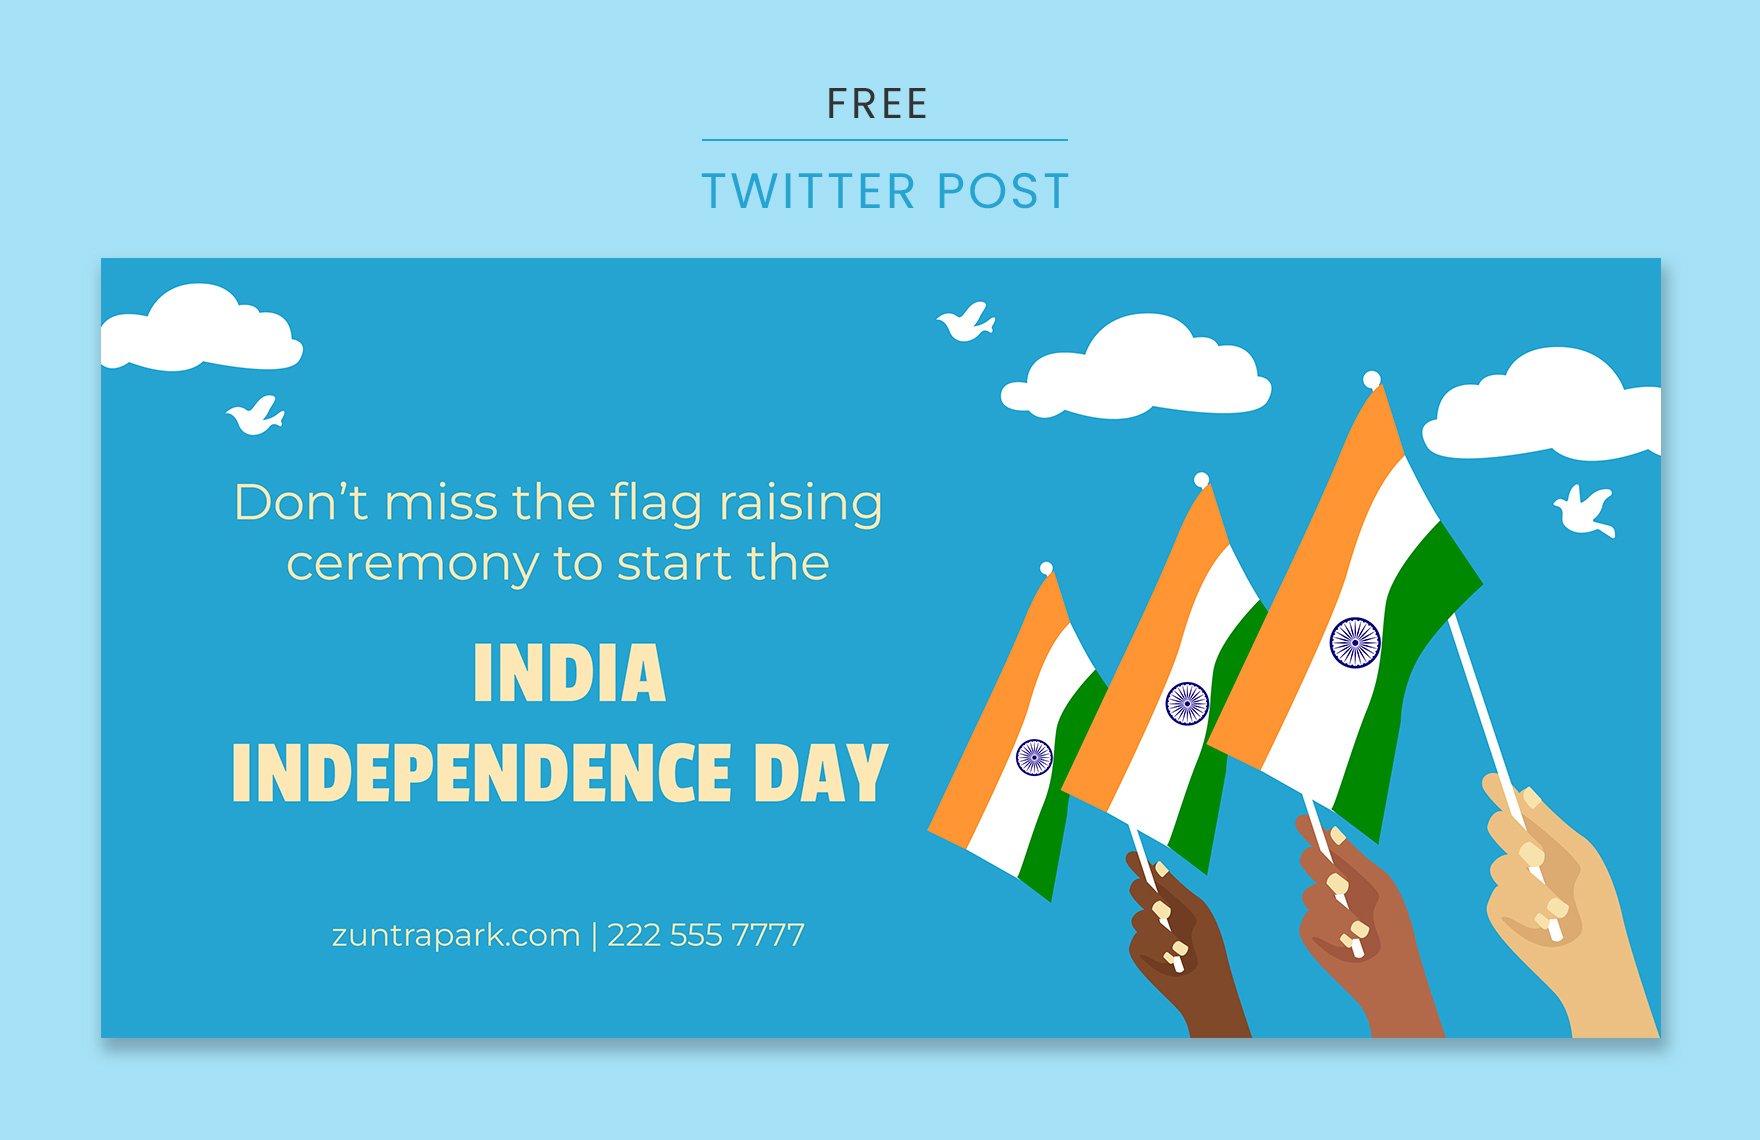 Free India Independence Day Twitter Post Template in PDF, Illustrator, SVG, JPEG